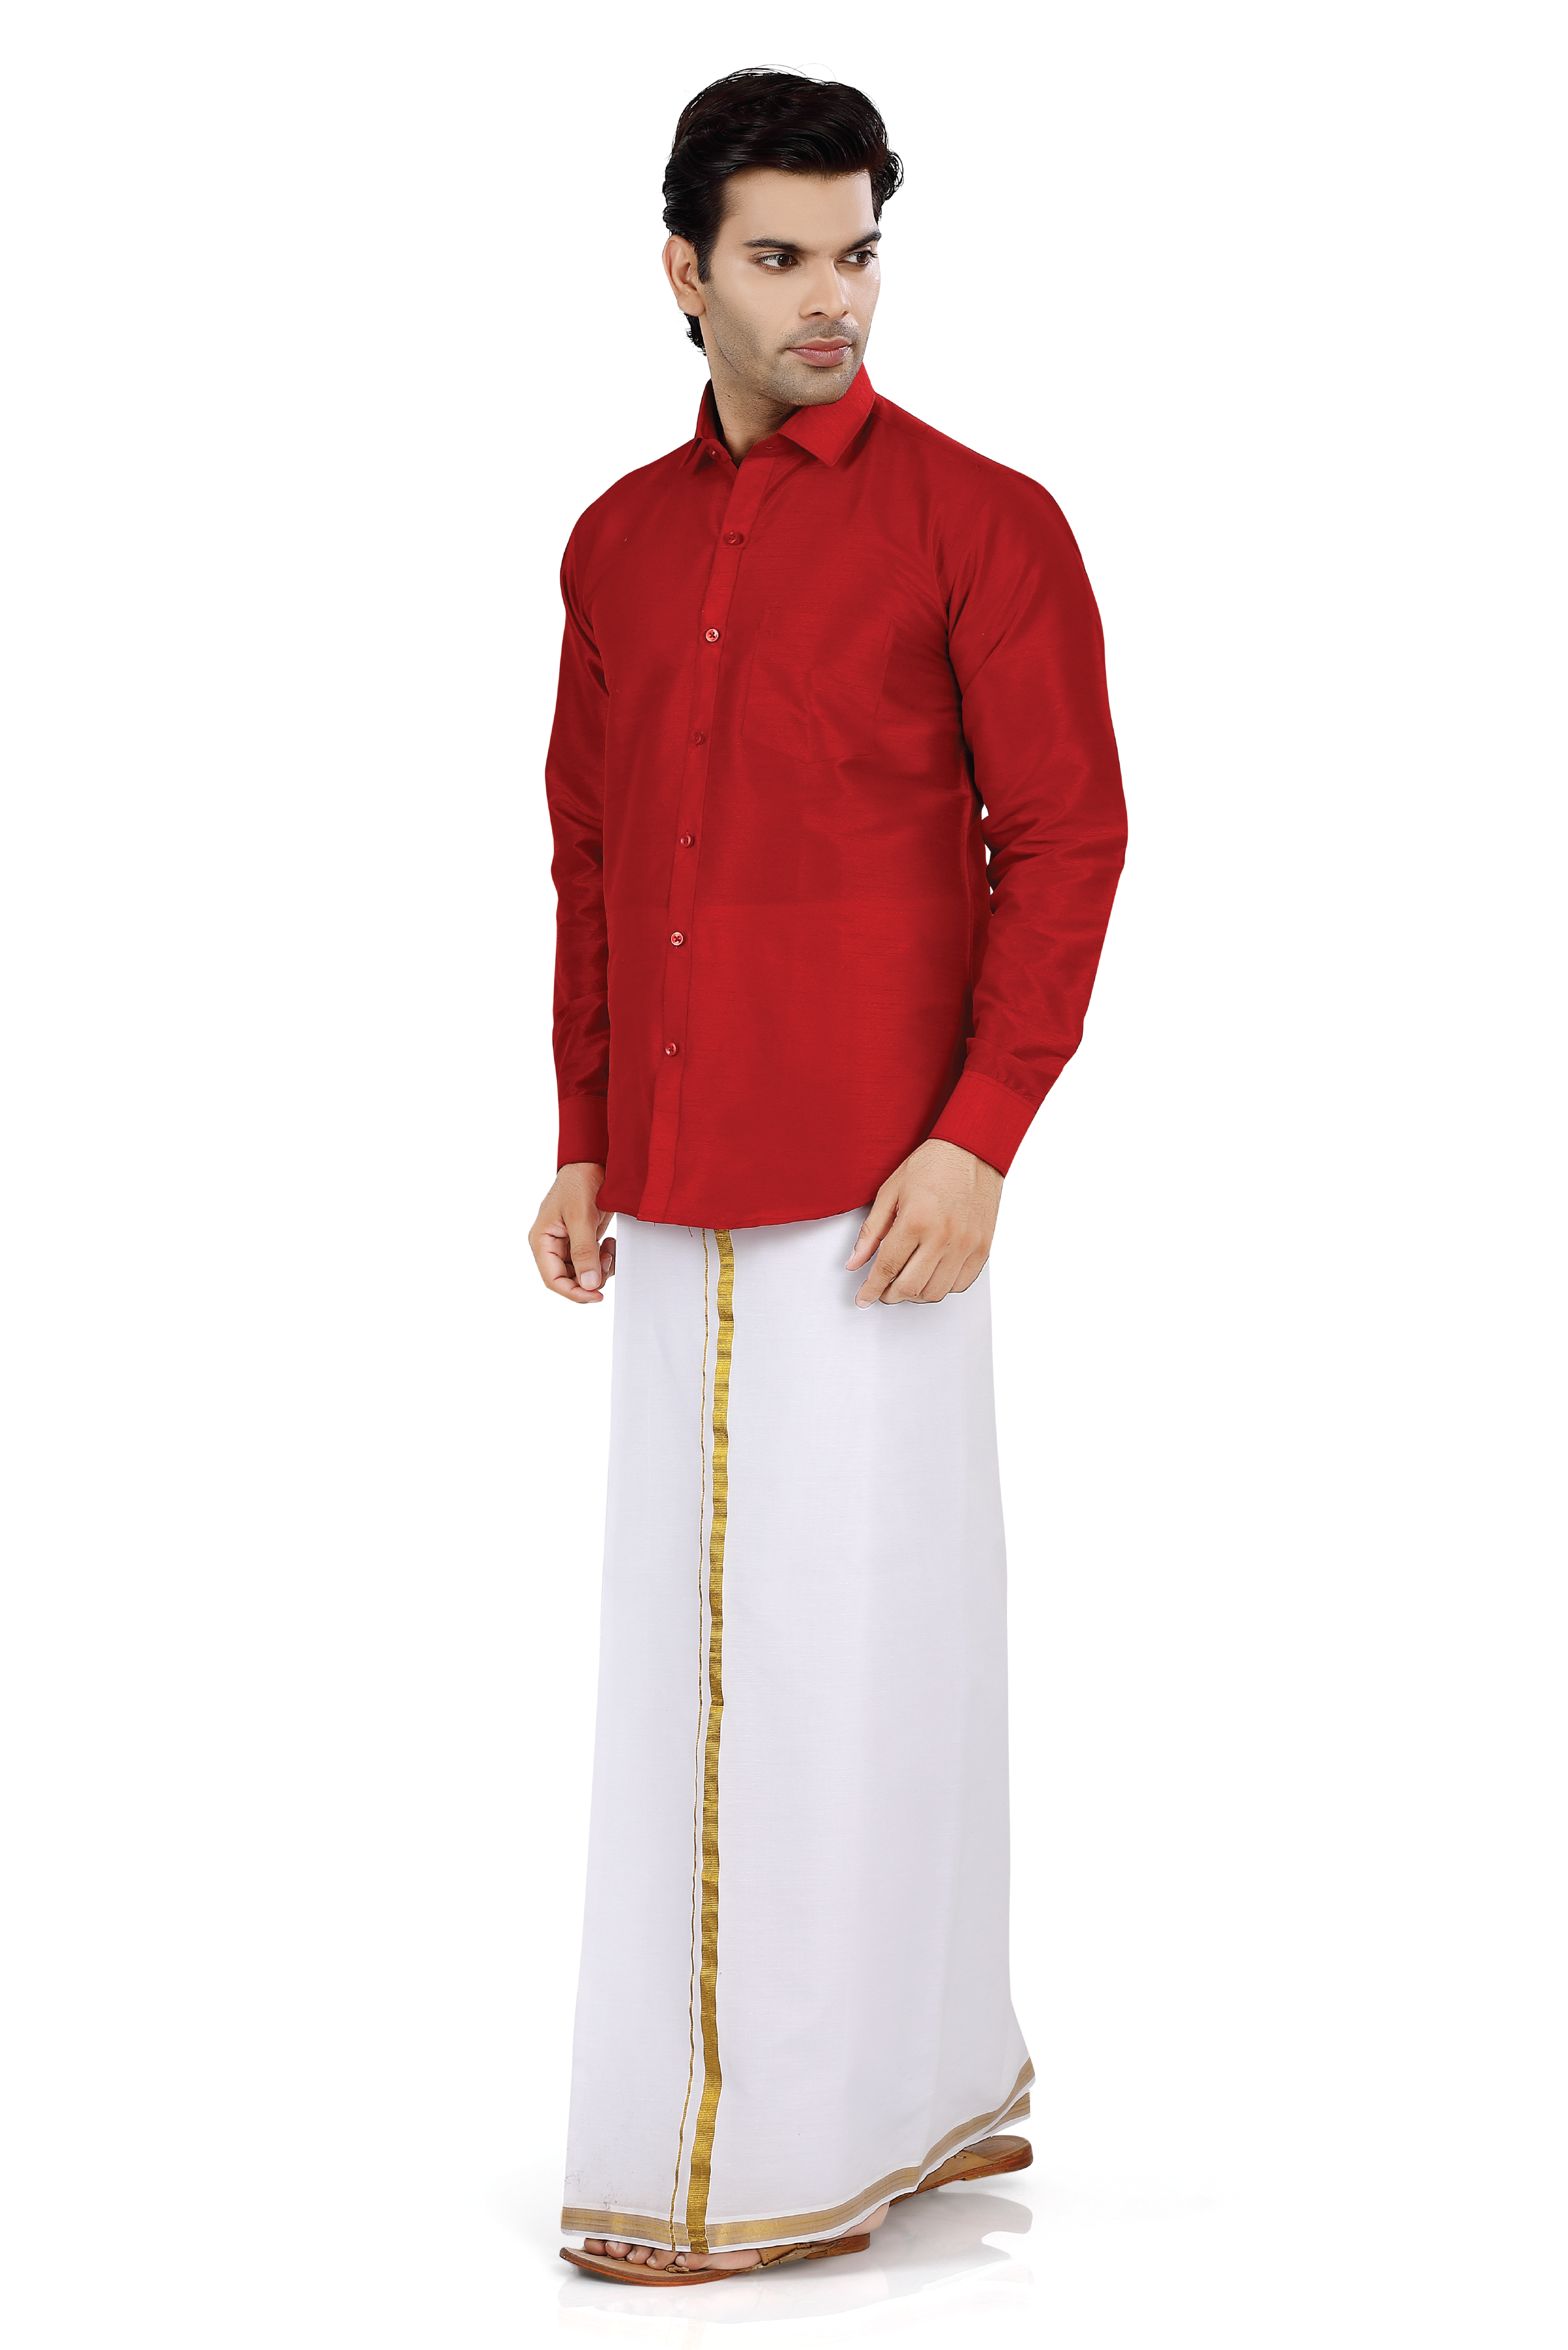 Dupion Silk Shirt in Red Full sleeves with Cotton Dhoti - Premium Dhoti Kurta from Dapper Ethnic - Just $95! Shop now at Dulhan Exclusives